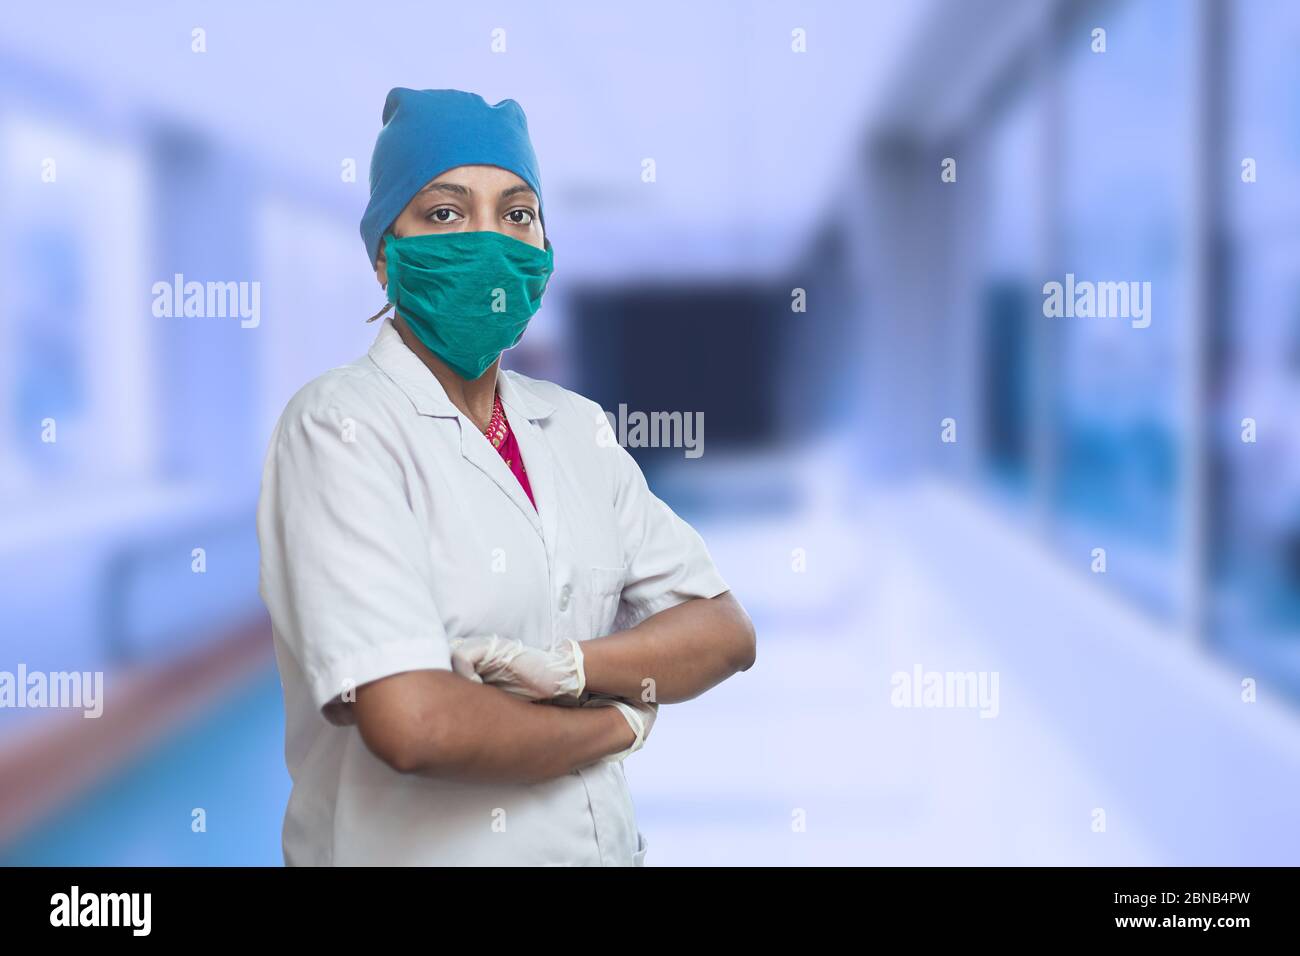 Portrait Of Female Medical Worker Doctor Wearing Surgical Mask And Cap Standing Crossed Arms Outside Hospital Corridor. Covid-19, Coronavirus Pandemic Stock Photo